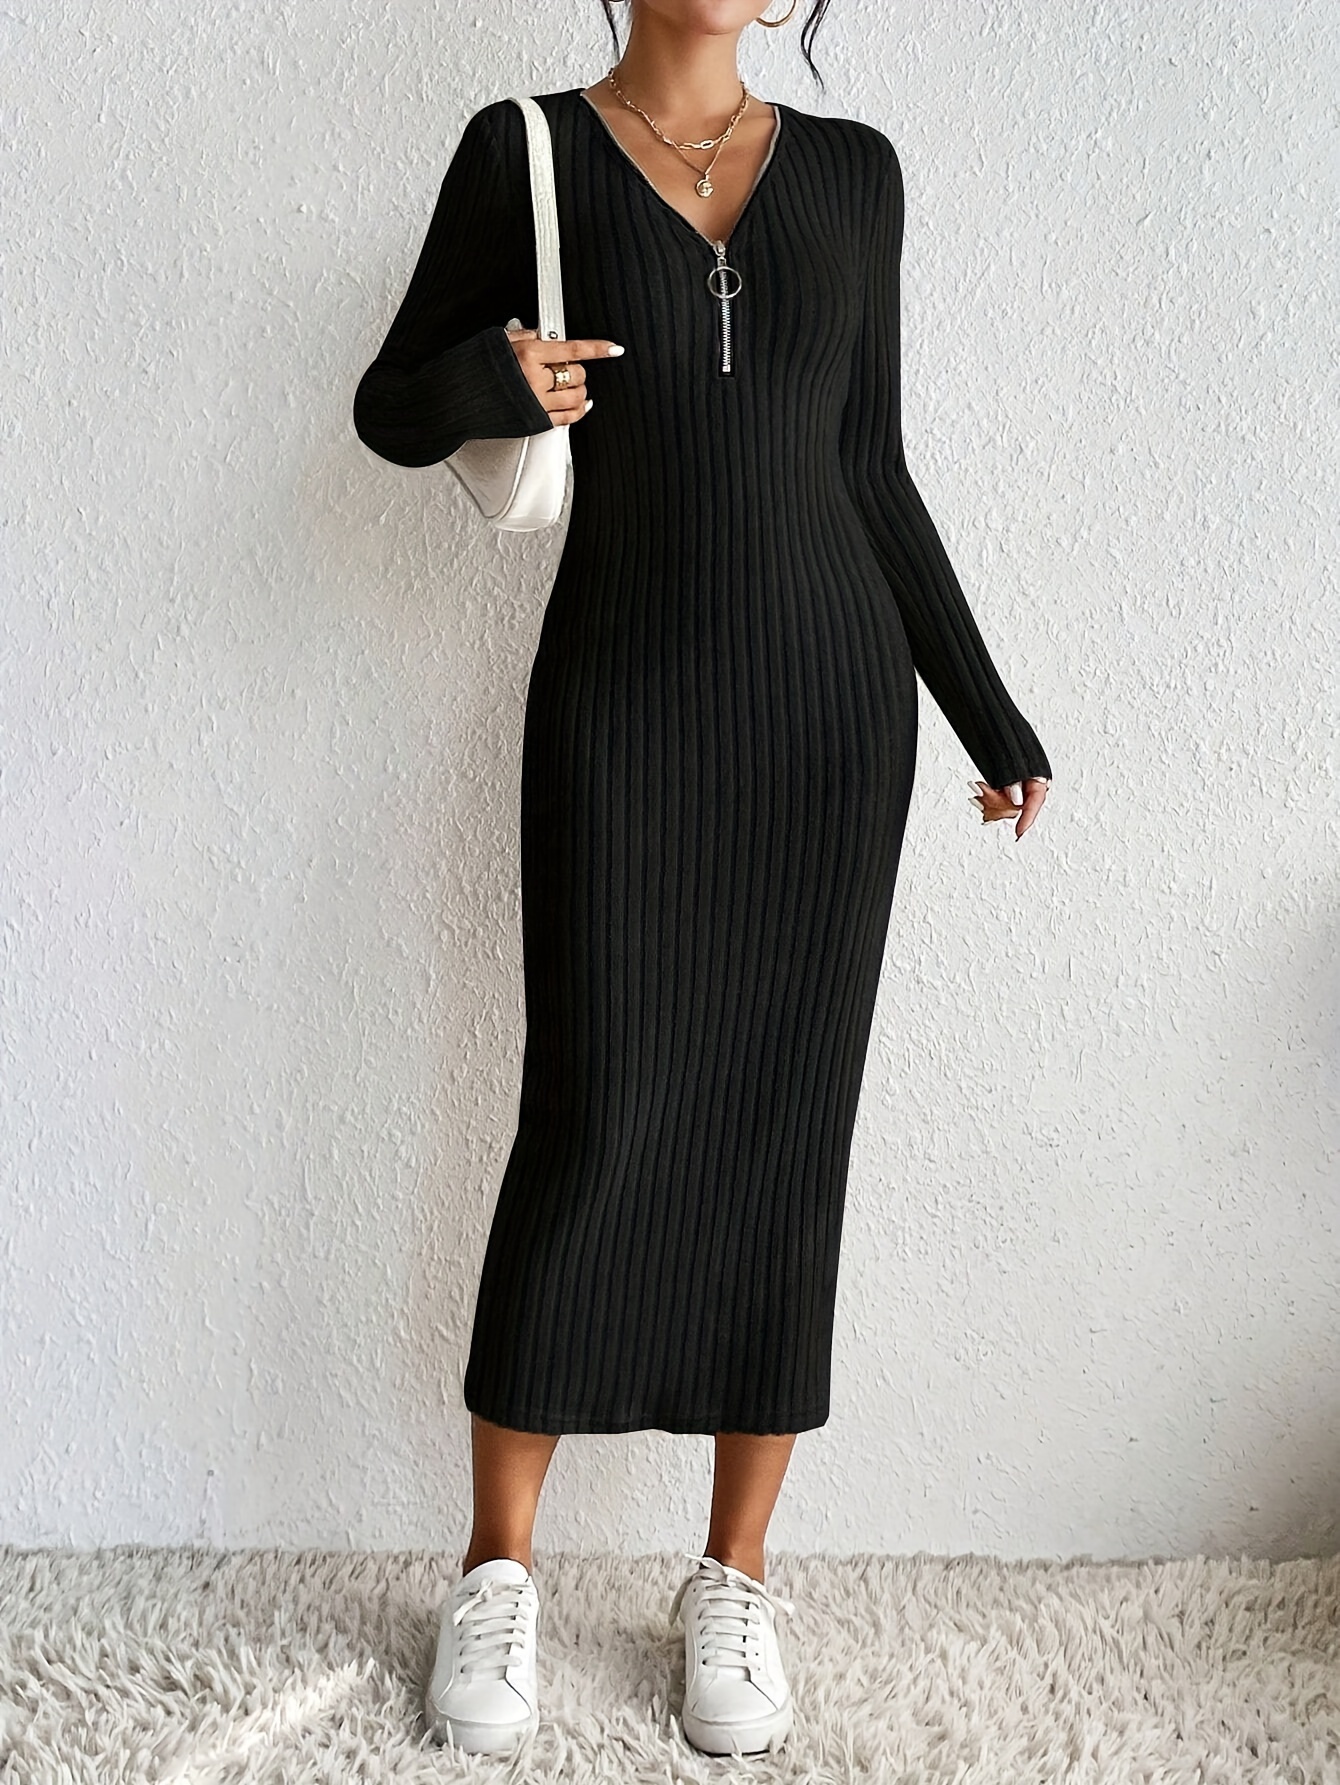 ribbed knit zip up v neck dress chic solid color long sleeve slim dress womens clothing details 7